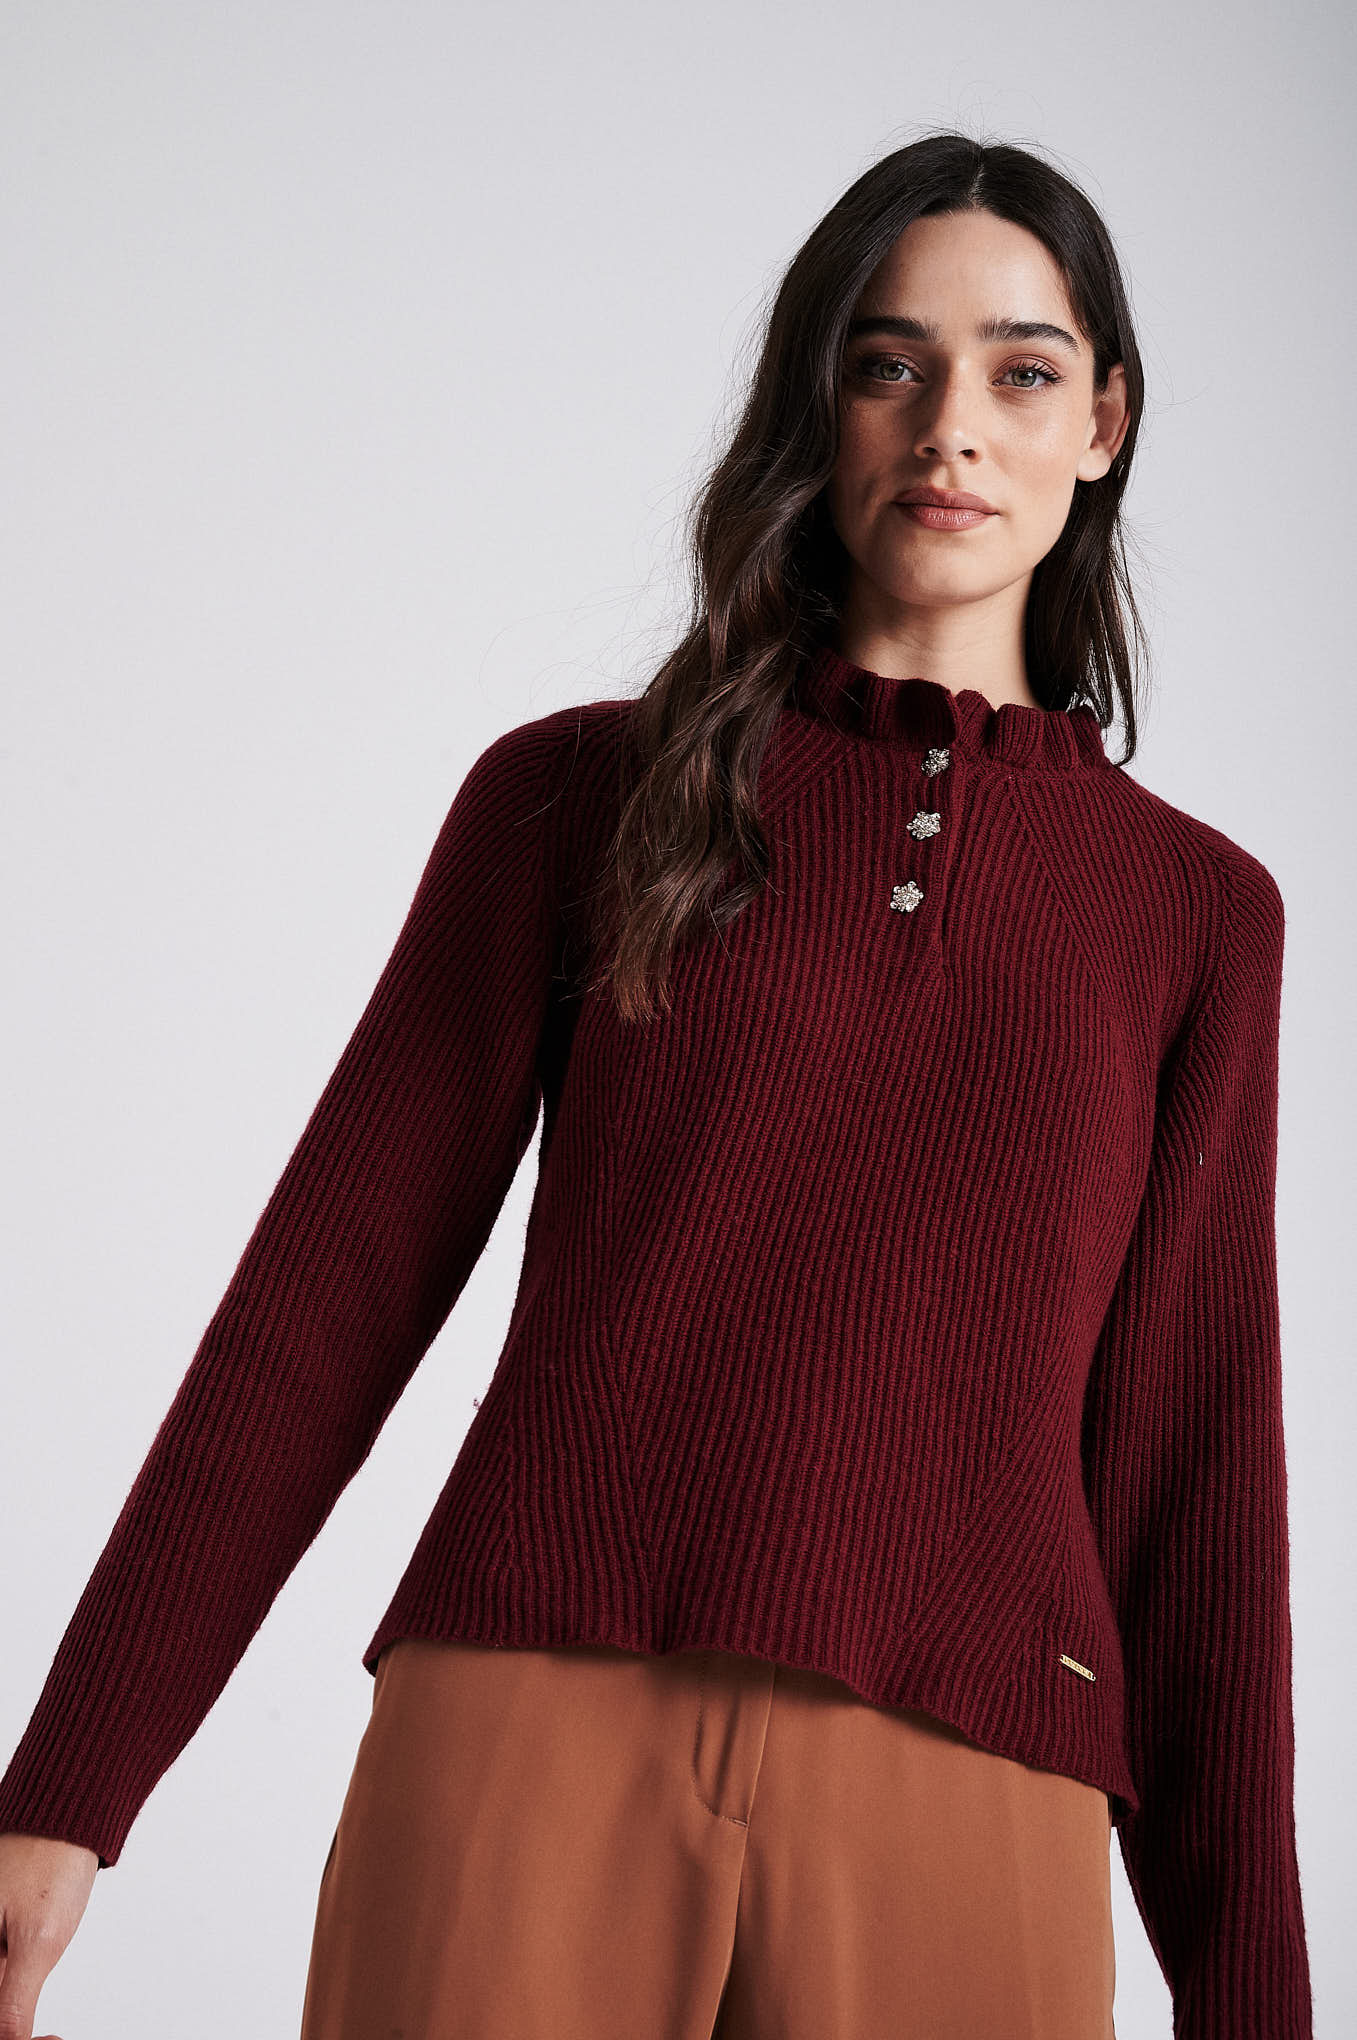 Sweater Red Casual Woman